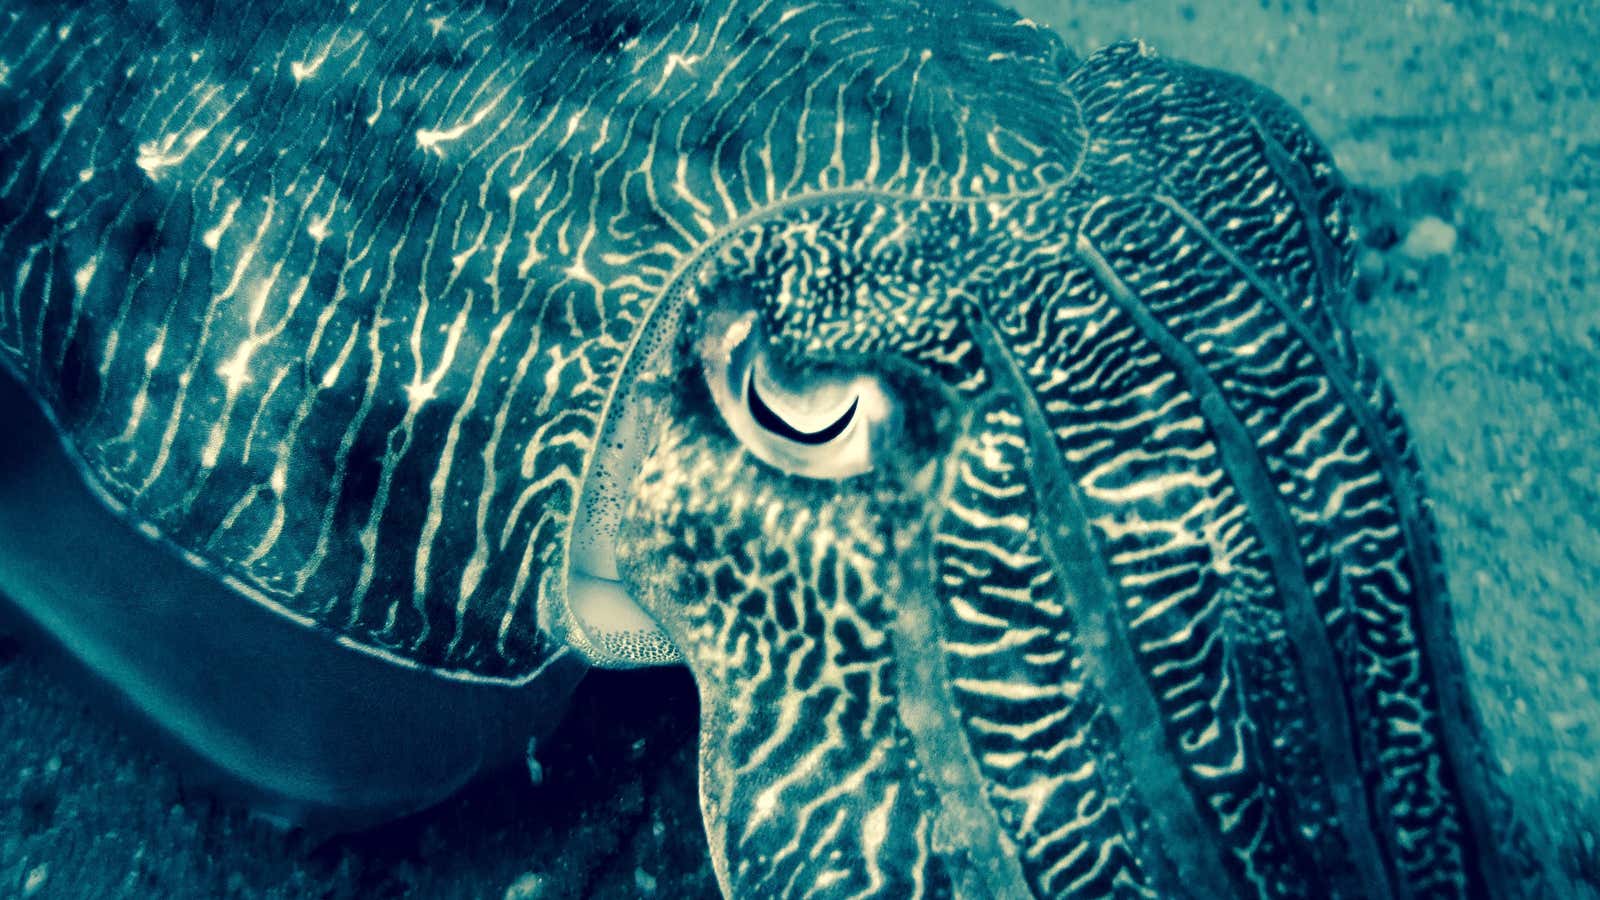 There are 100 species of cuttlefish, all of them wondrous.